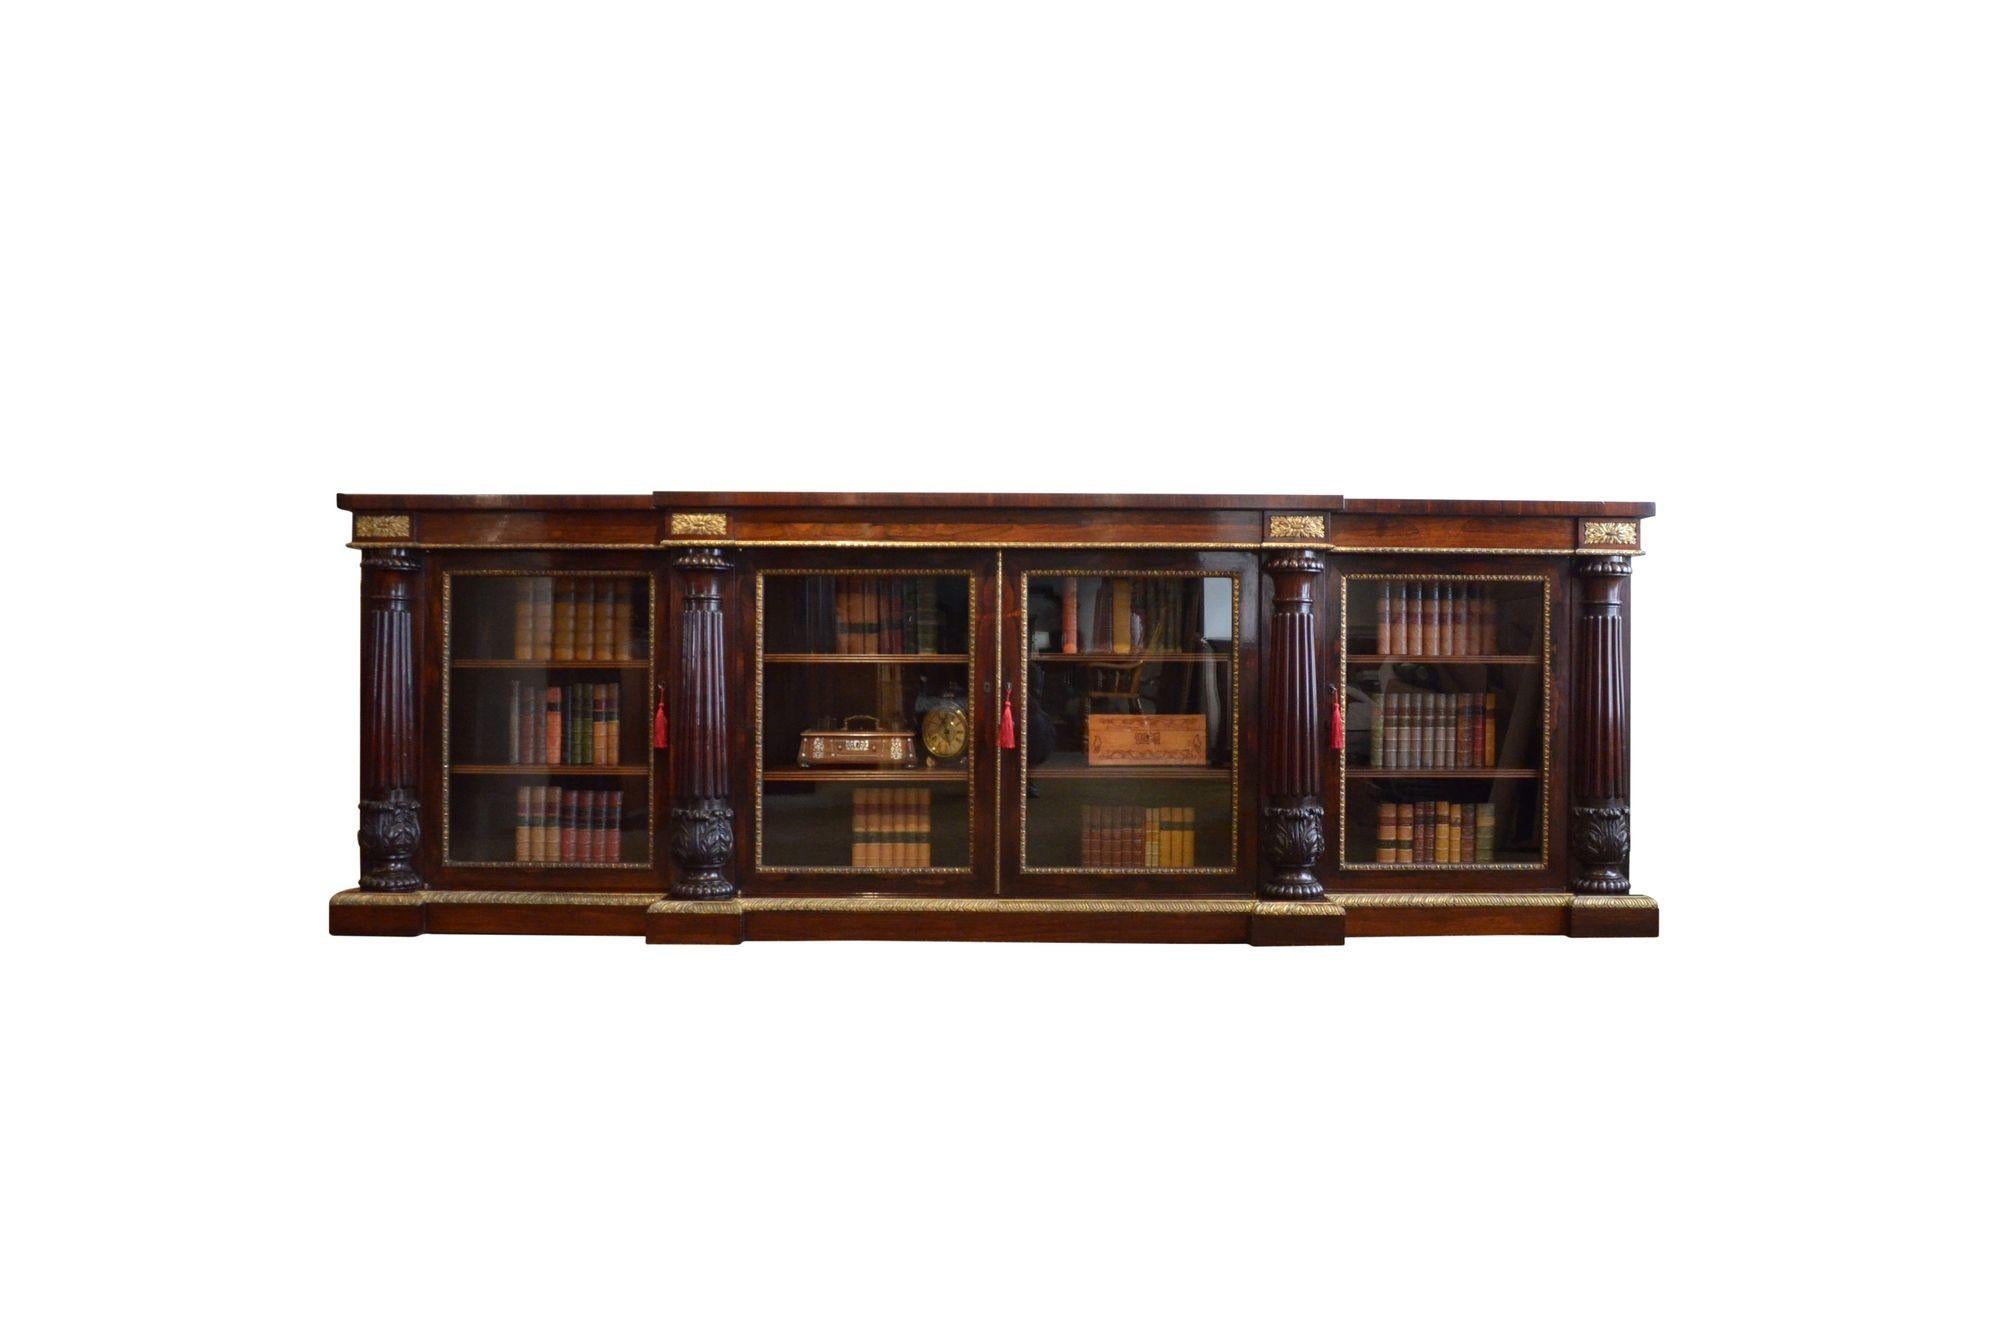 A Long English Regency Gilllows Rosewood Cabinet In Good Condition For Sale In Whaley Bridge, GB